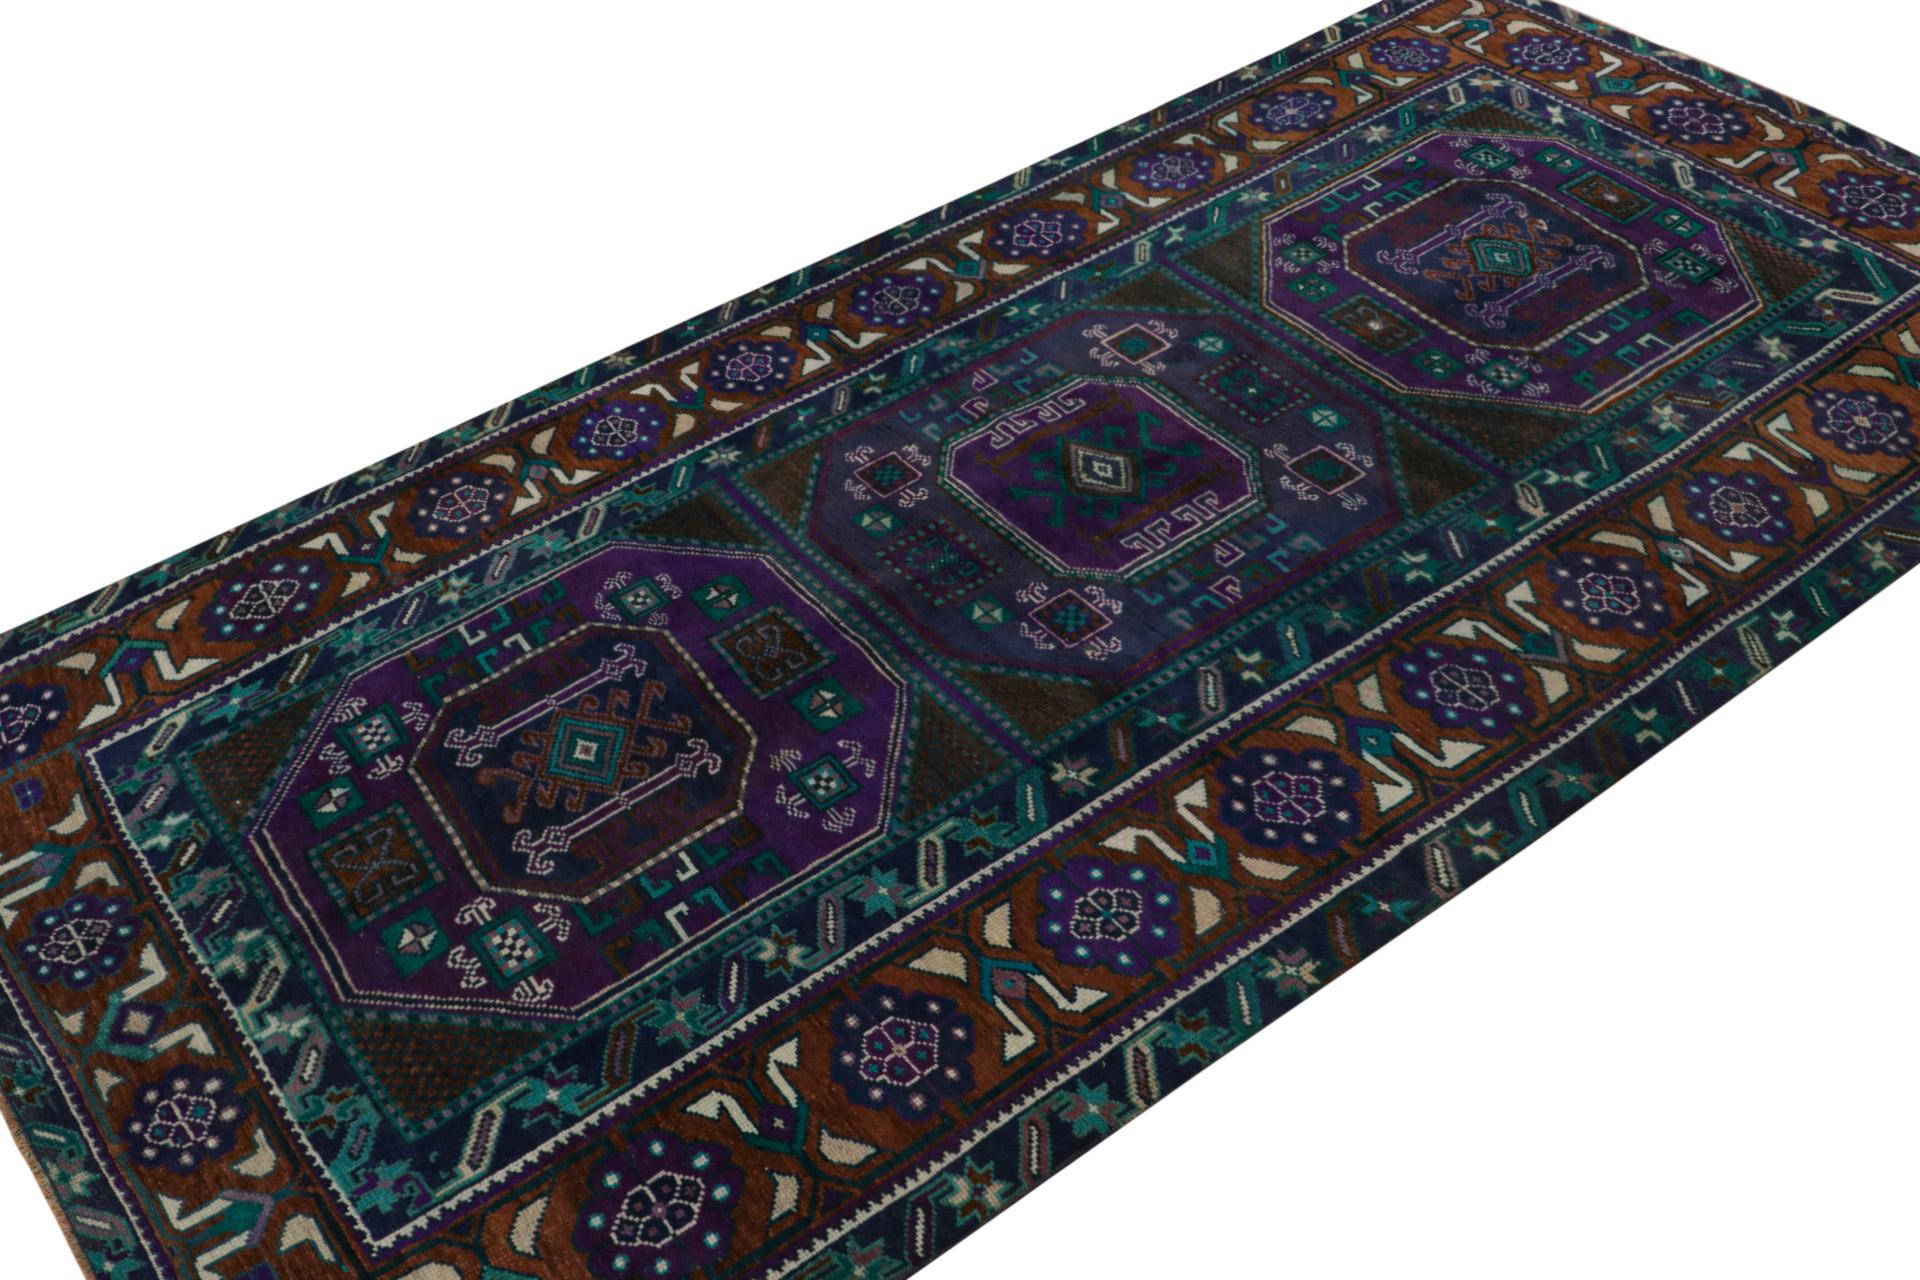 Hand Knotted in wool, this rare vintage 5x9 Oushak runner rug from the rare series of mid-century runners, features saturated teal tones which underscore vibrant purple, blue and brown with rust accents in the geometric patterns. 

On the Design: